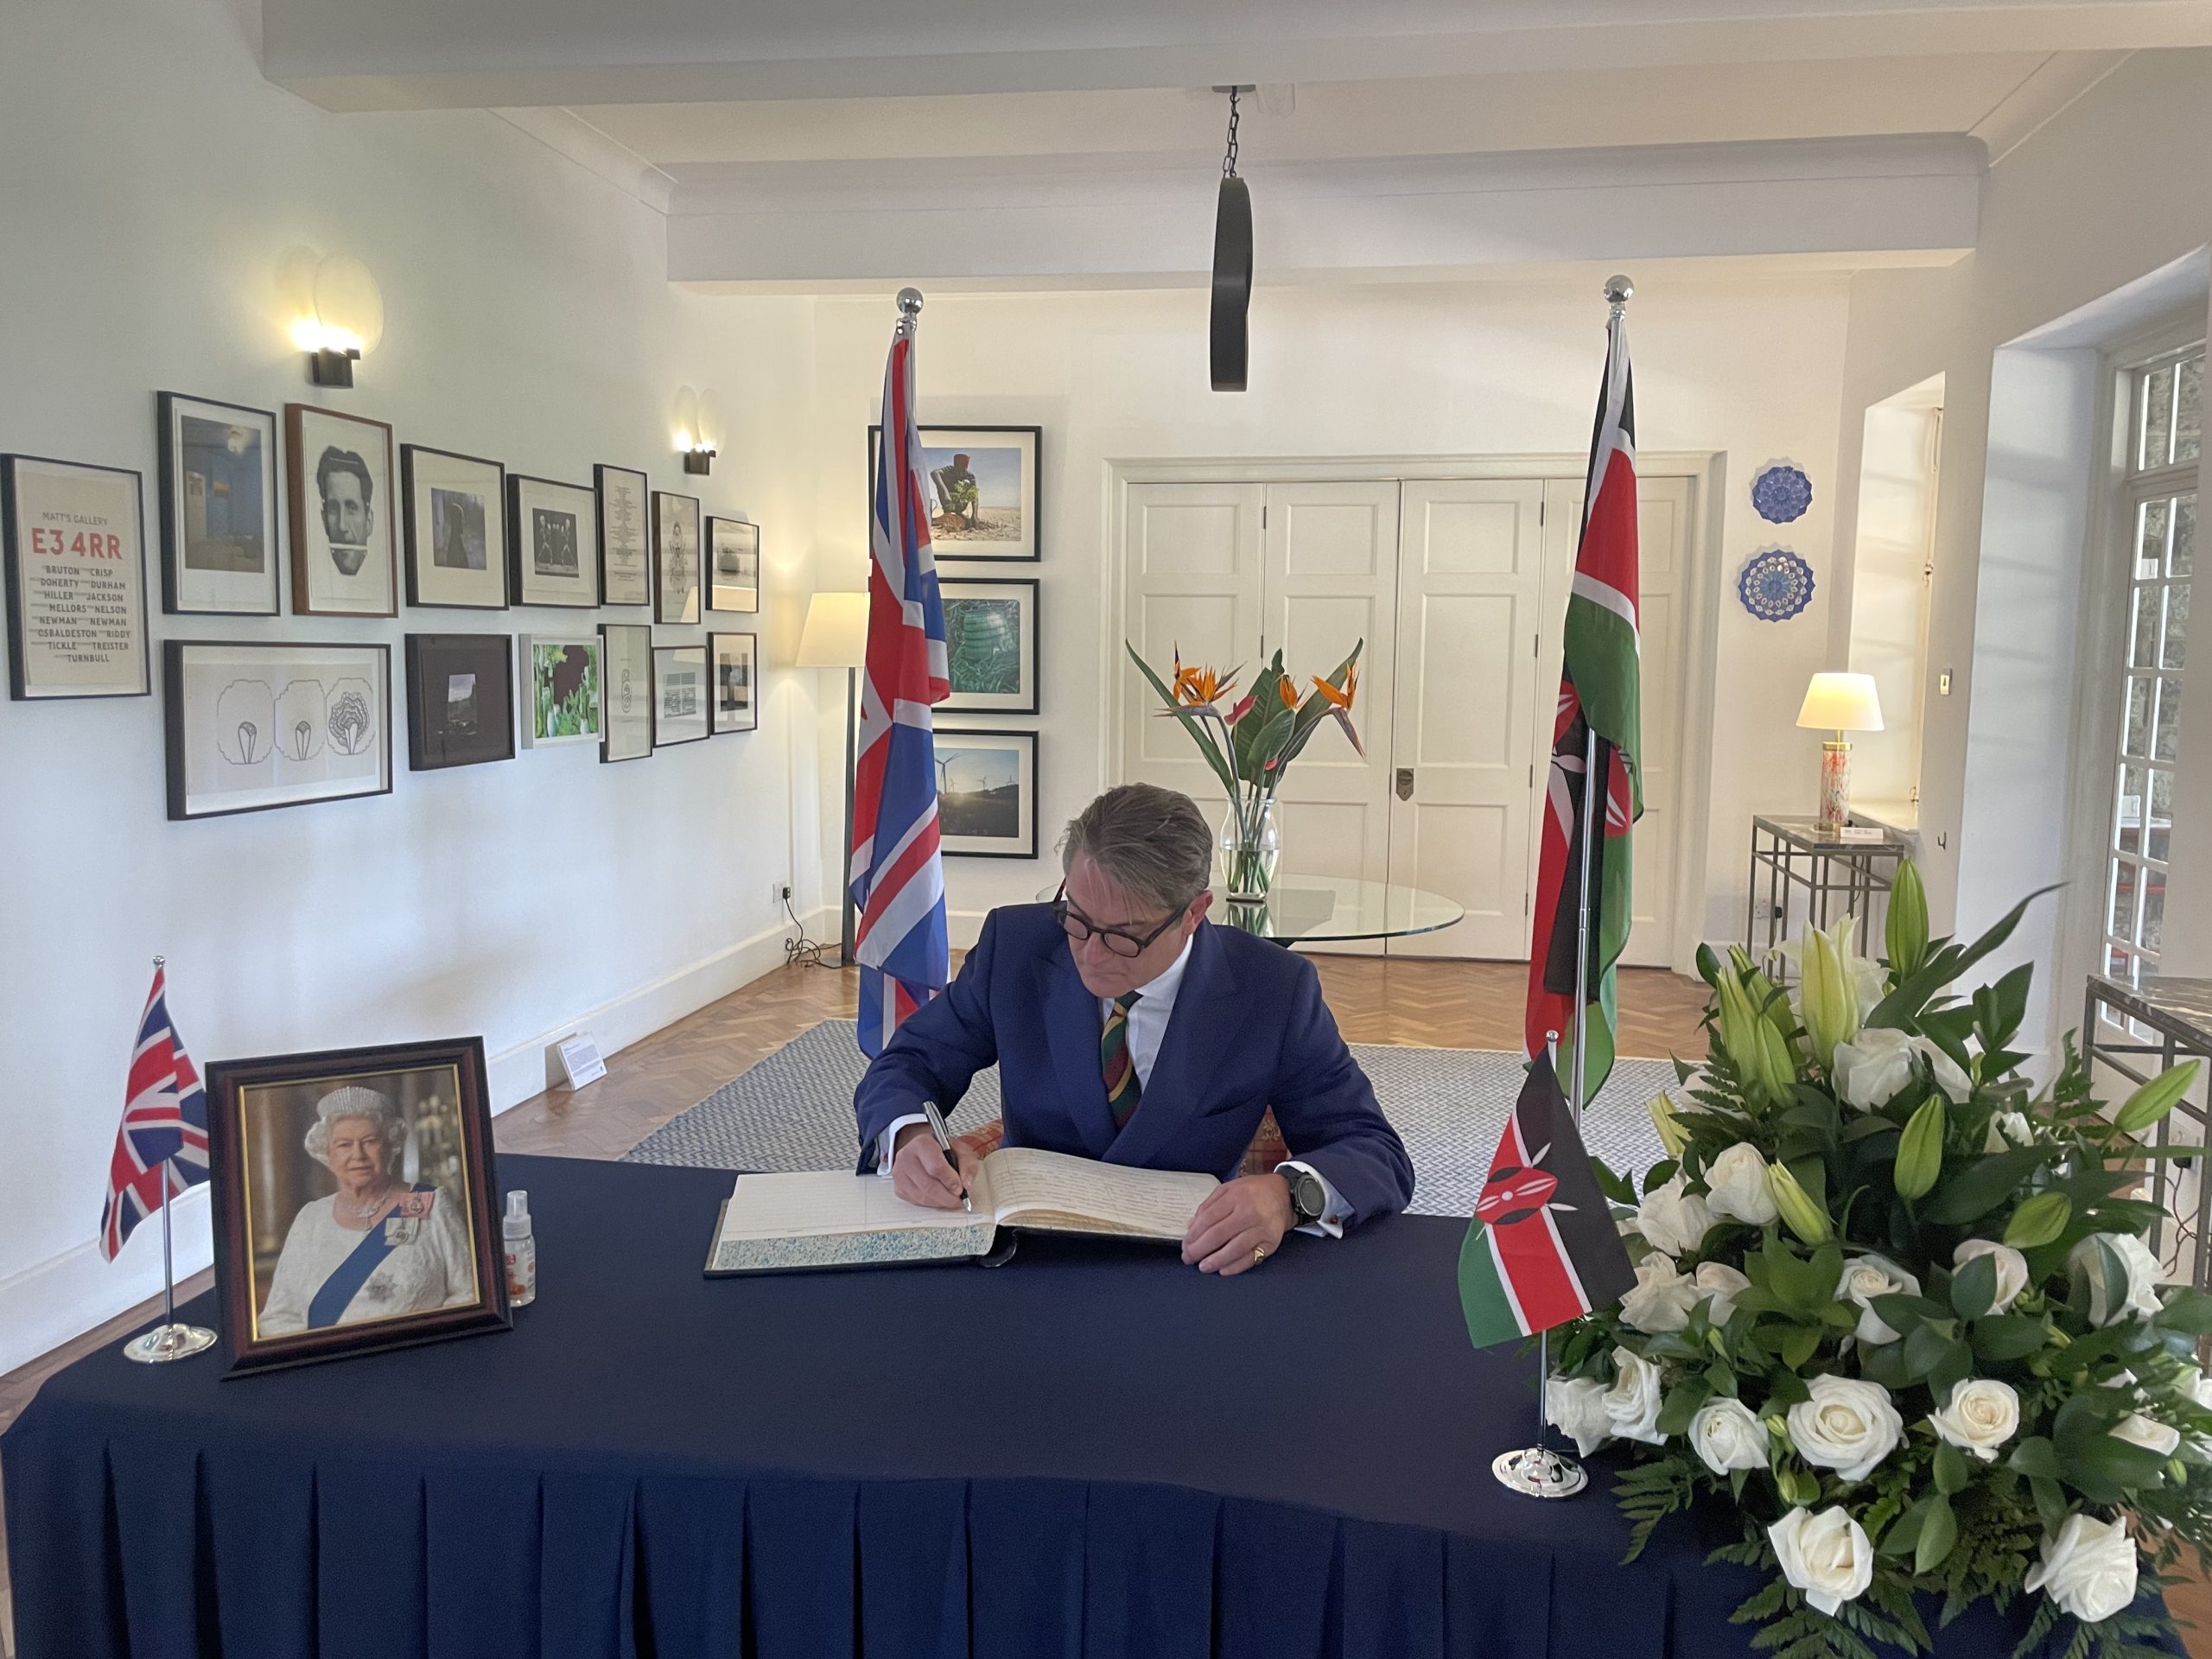 Signing the Book of Condolance